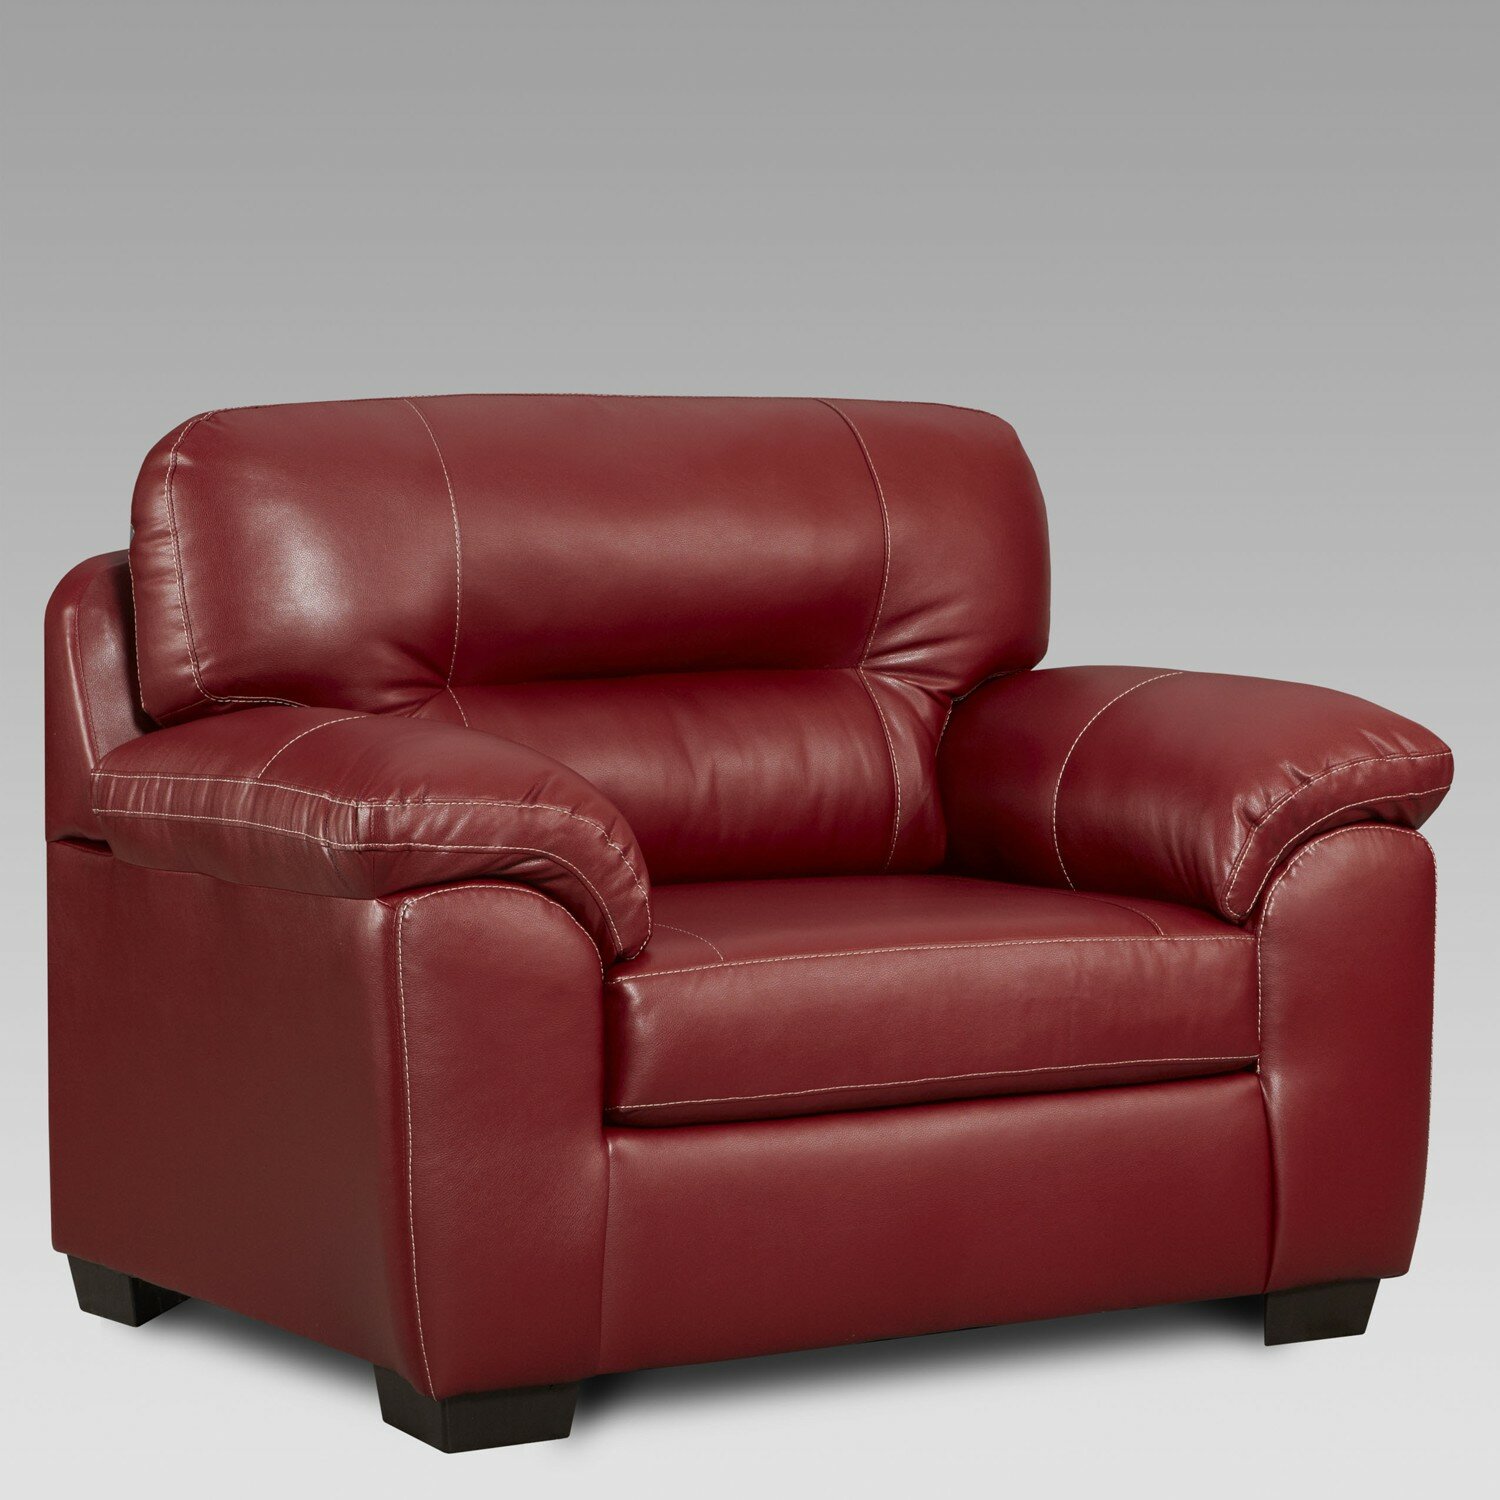 Red Barrel Studio Rainsburg Oversized Chair and a Half & Reviews